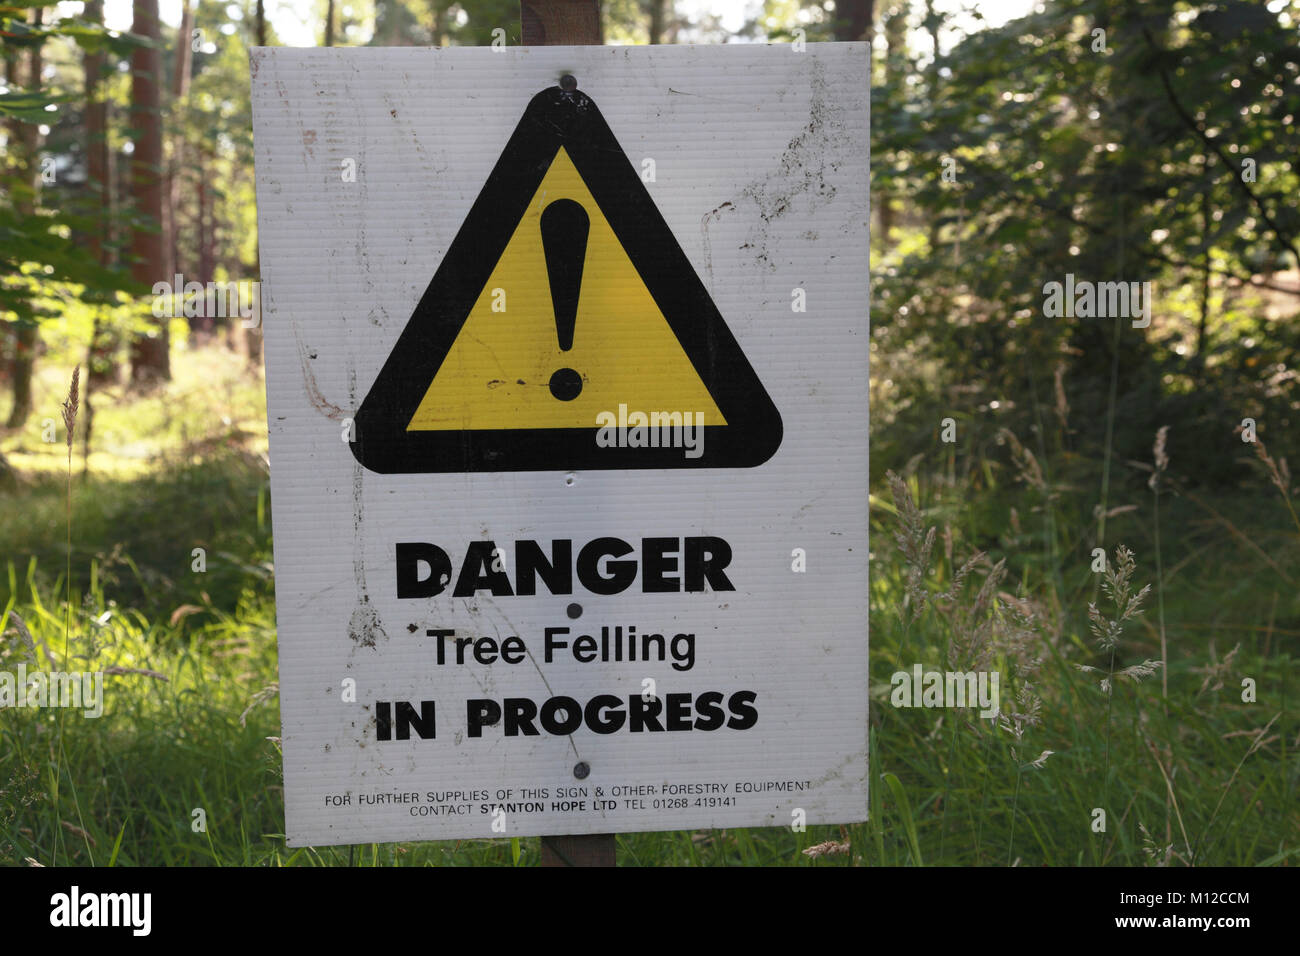 Sign indicating Danger because tree felling is in progress in Aberdeenshire, Scotland Stock Photo